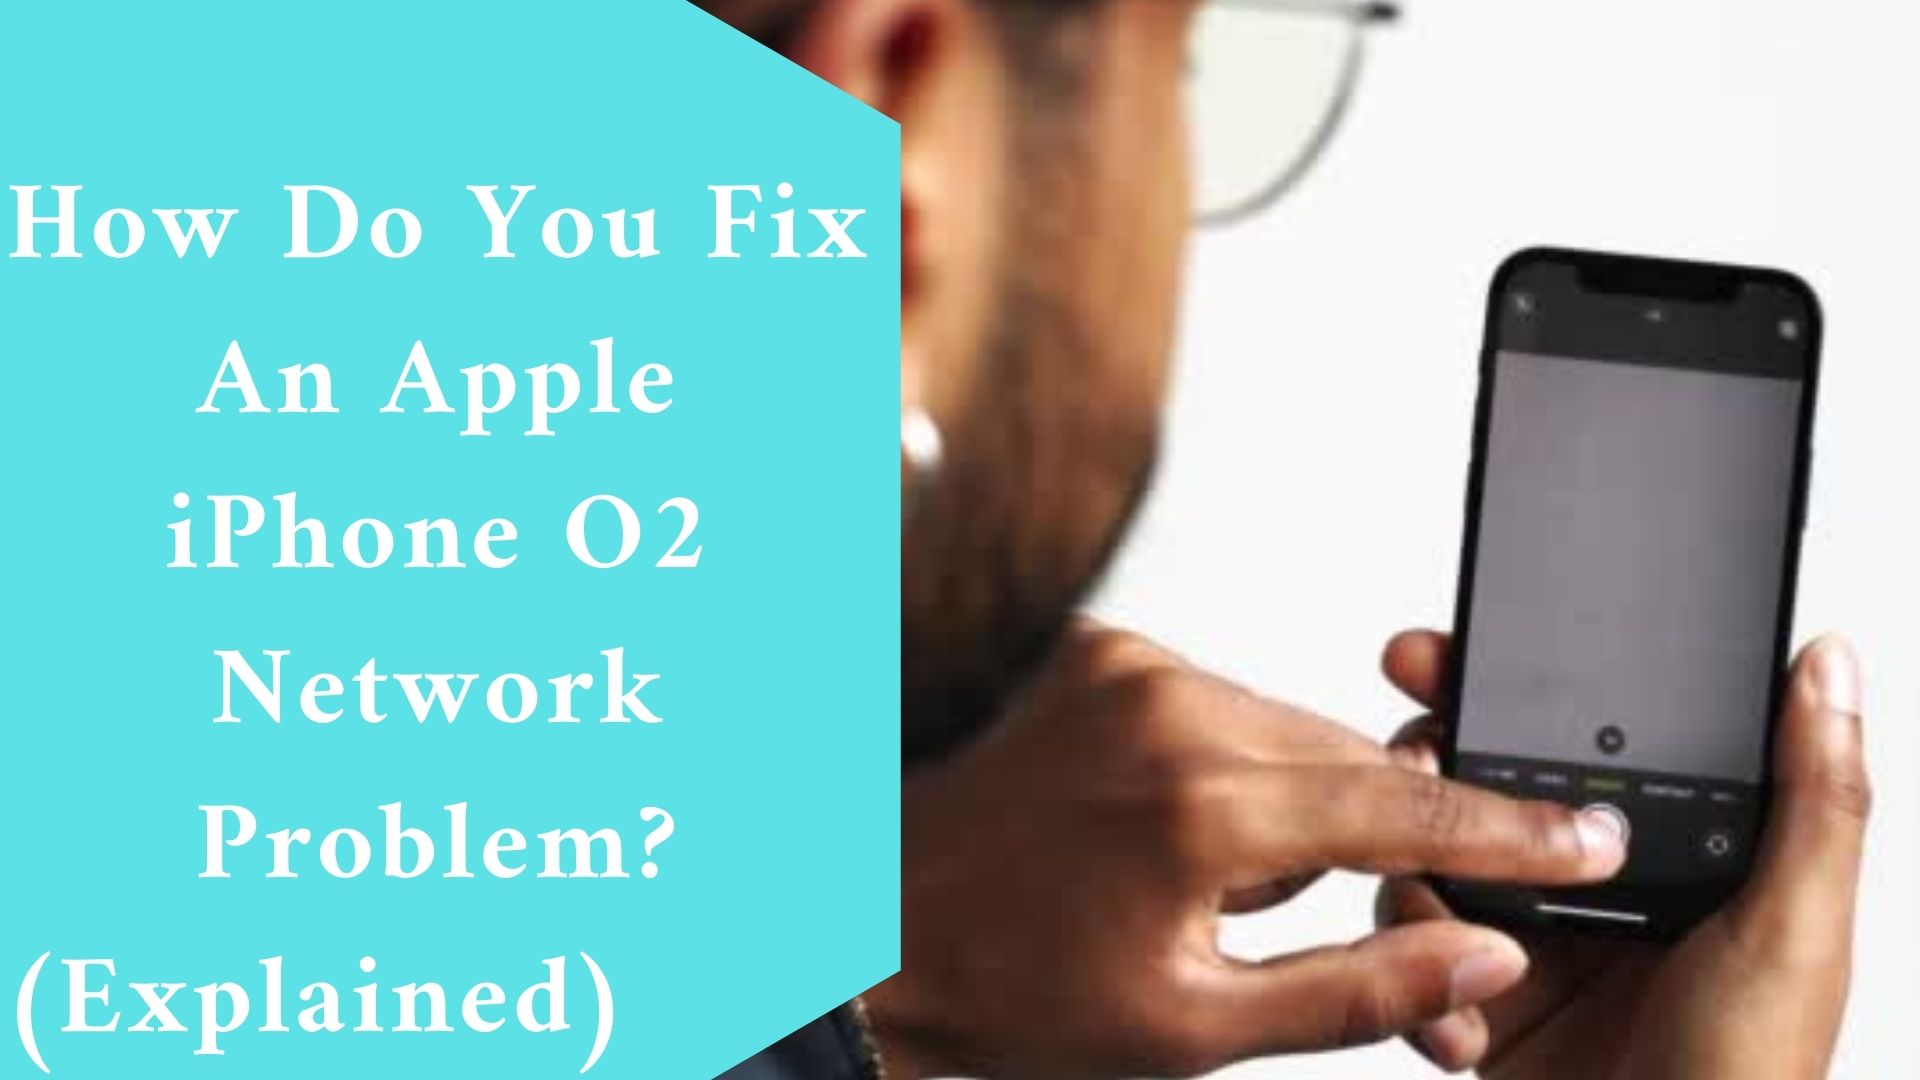 How Do You Fix An Apple iPhone O2 Network Problem? (Explained)